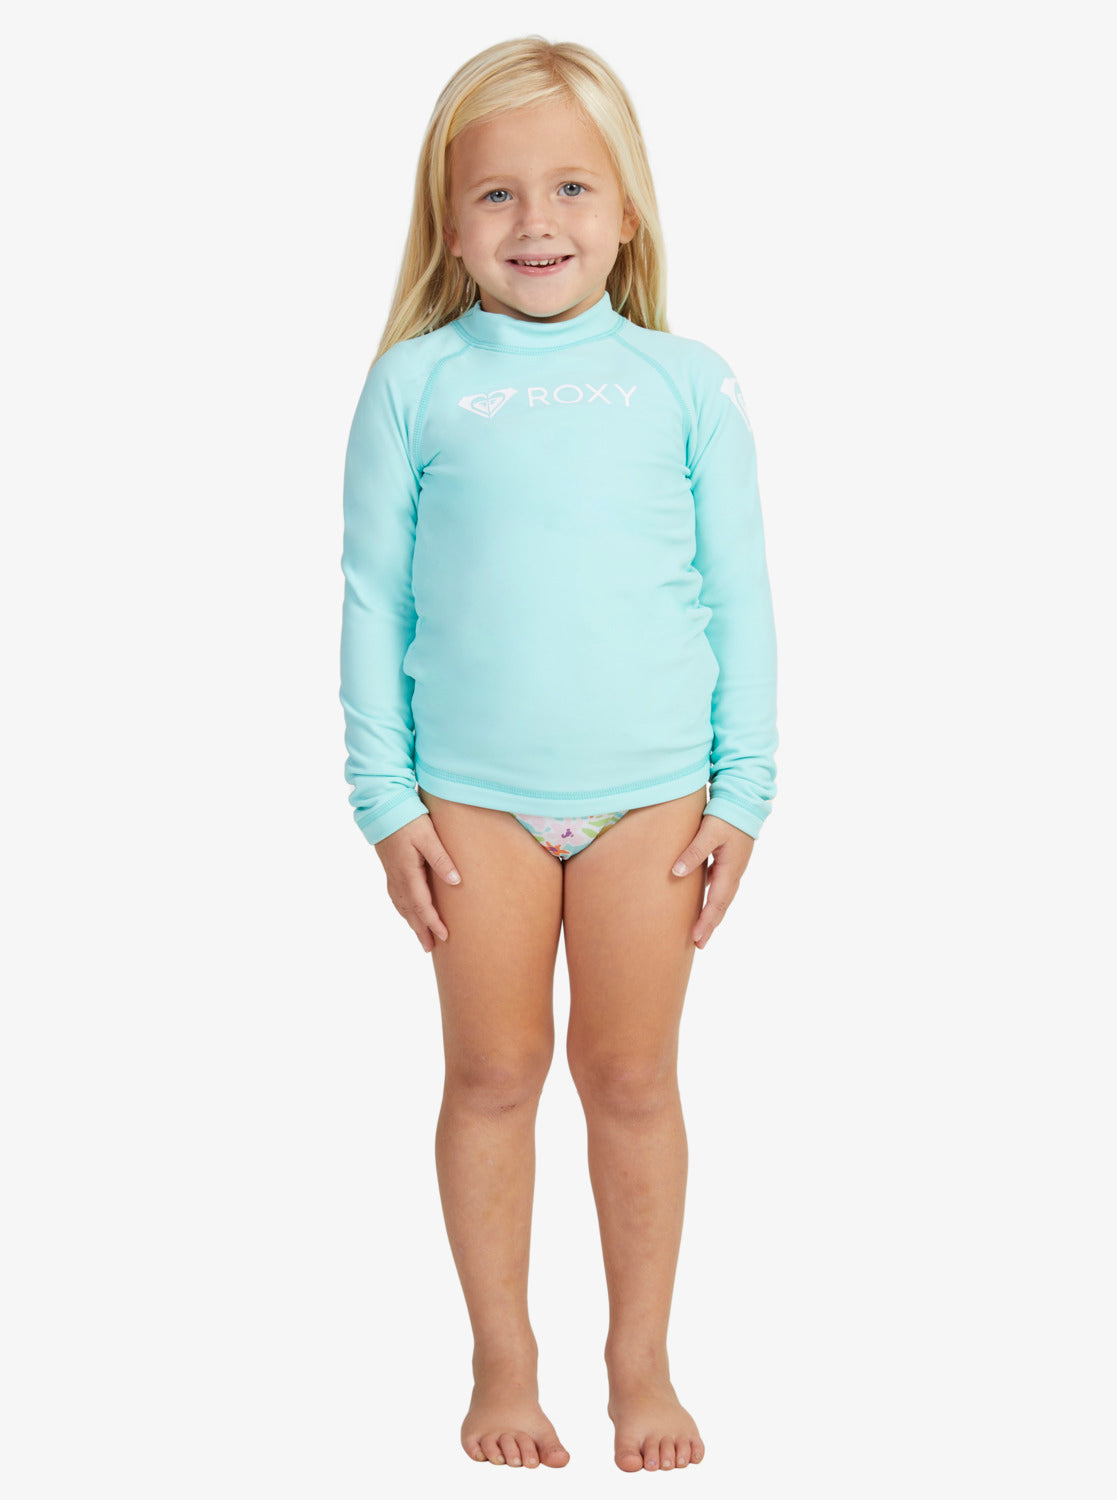 Blonde child wearing the Roxy Toddler Heater Long Sleeve Thermal Rash Top in light blue